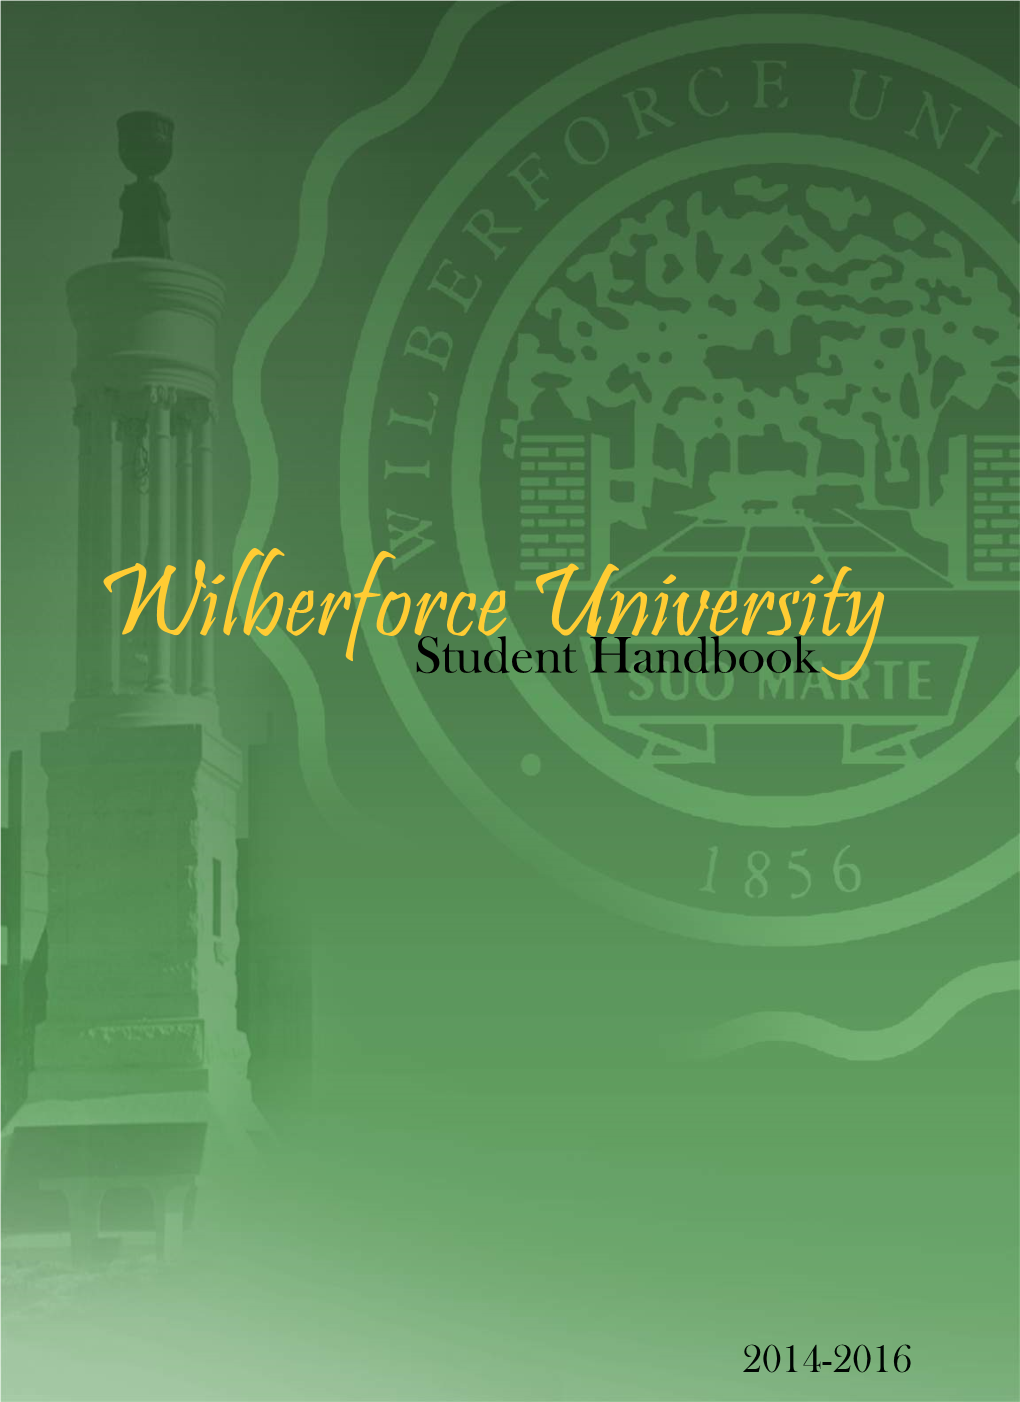 Student Handbook Is Designed to Provide Valuable Orientation Information, As You Begin and Continue This Journey